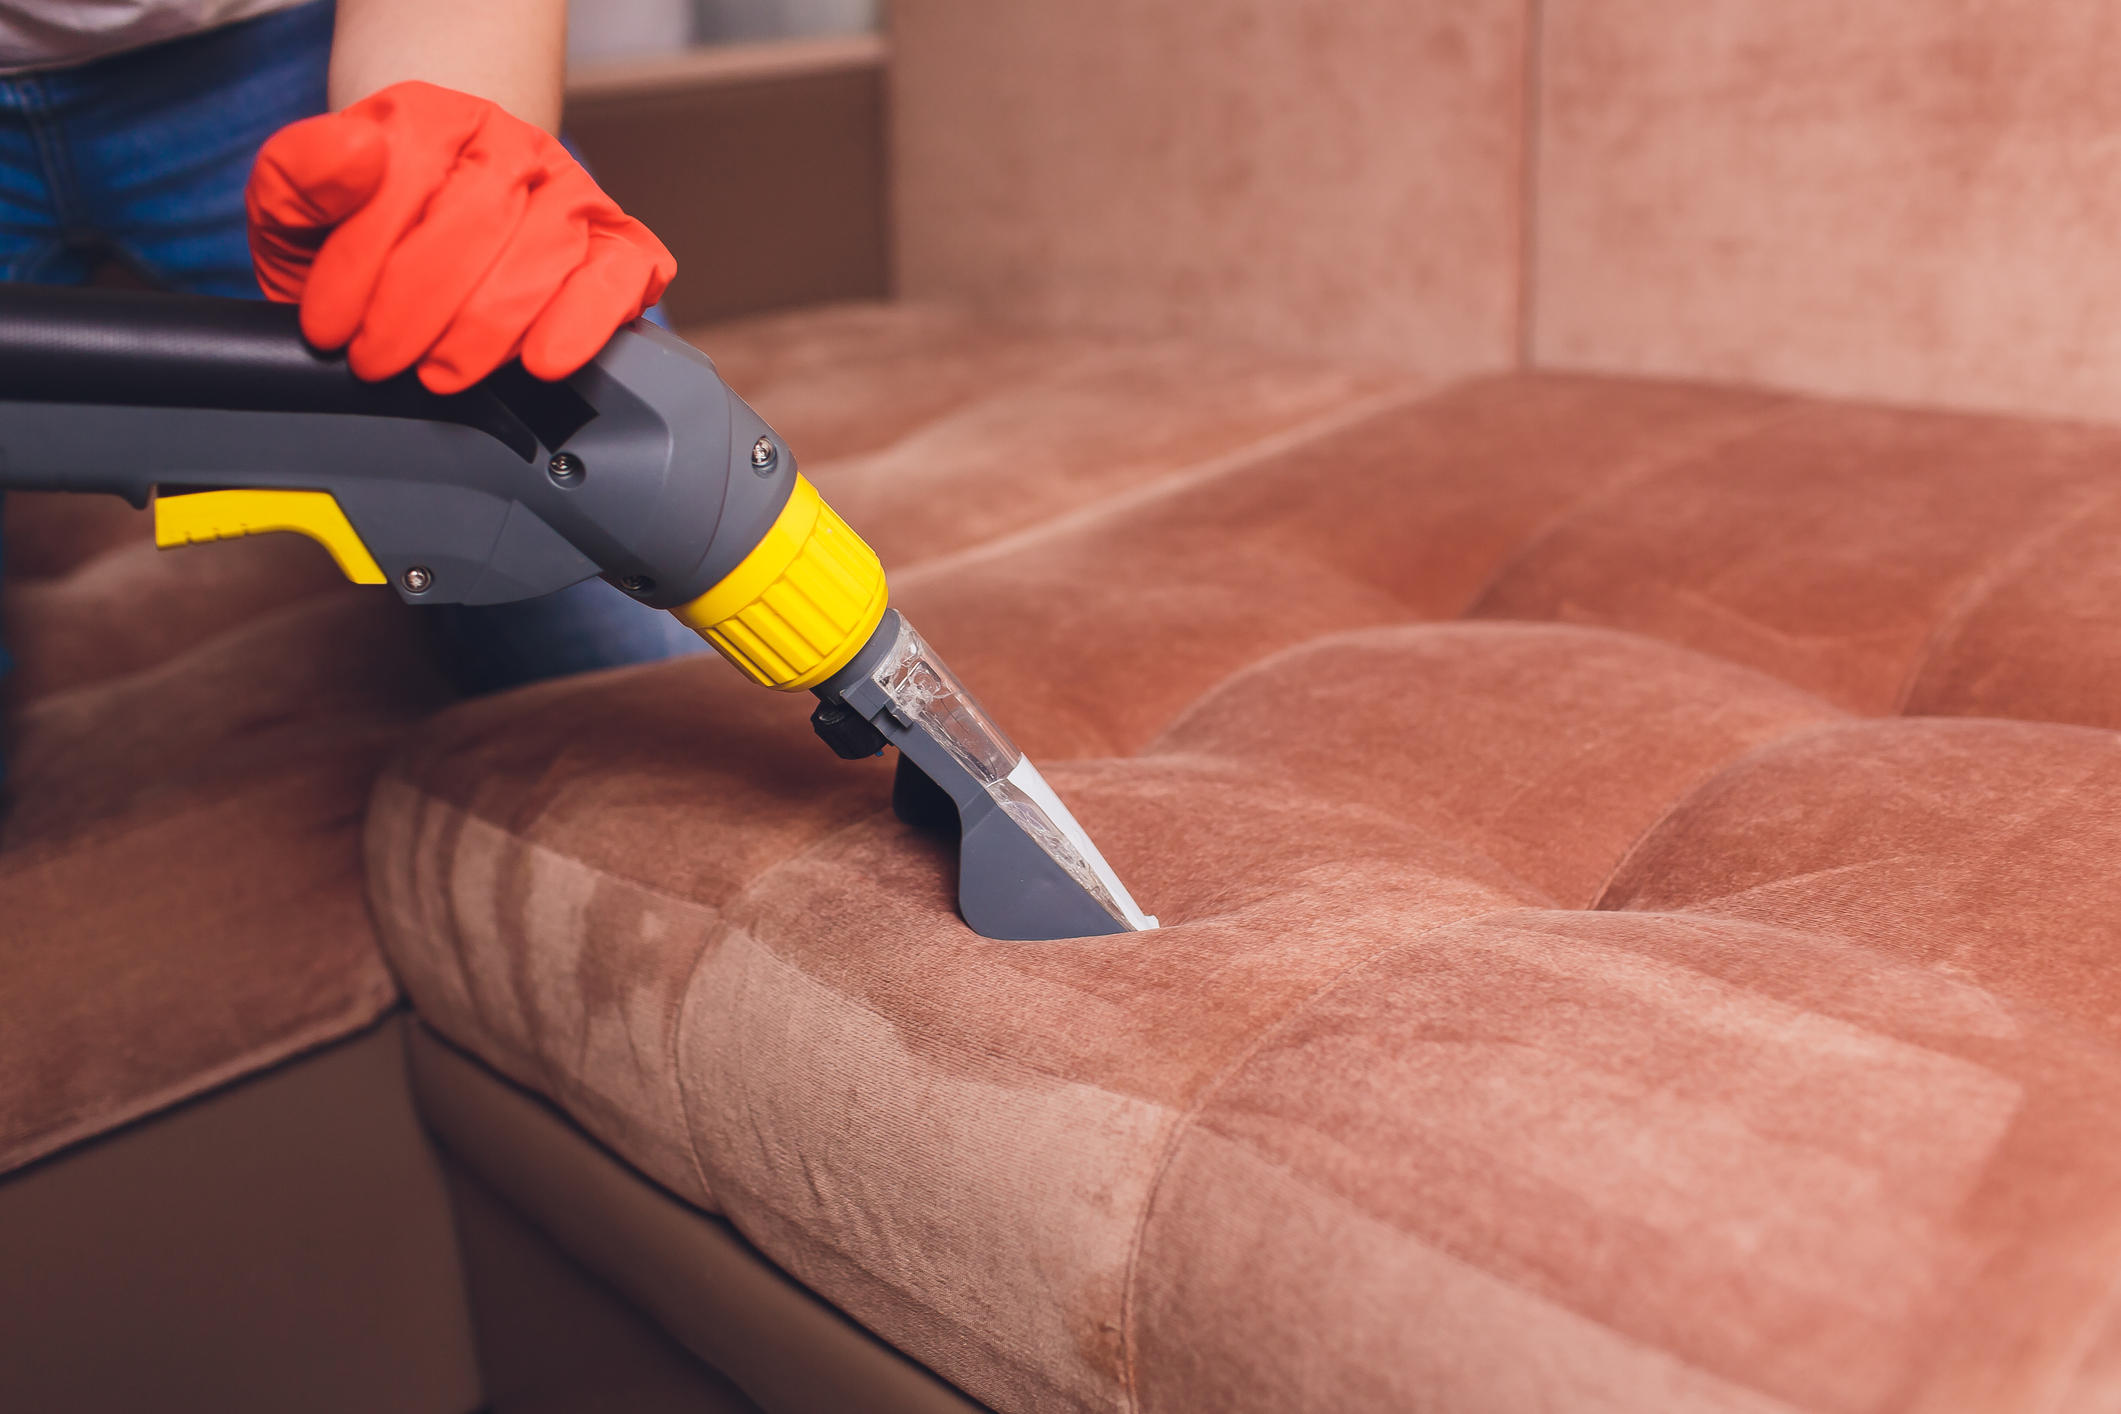 Our upholstery cleaning service provides a thorough and meticulous cleaning for various upholstered furniture. Using advanced equipment and eco-friendly solutions, we effectively eliminate stains, dirt, and allergens from your sofas, chairs, and other items. Our skilled team ensures a secure and efficient cleaning process, allowing you to enjoy a revitalized living space. Flexible scheduling options are available to suit your preferences and minimize disruption to your routine.